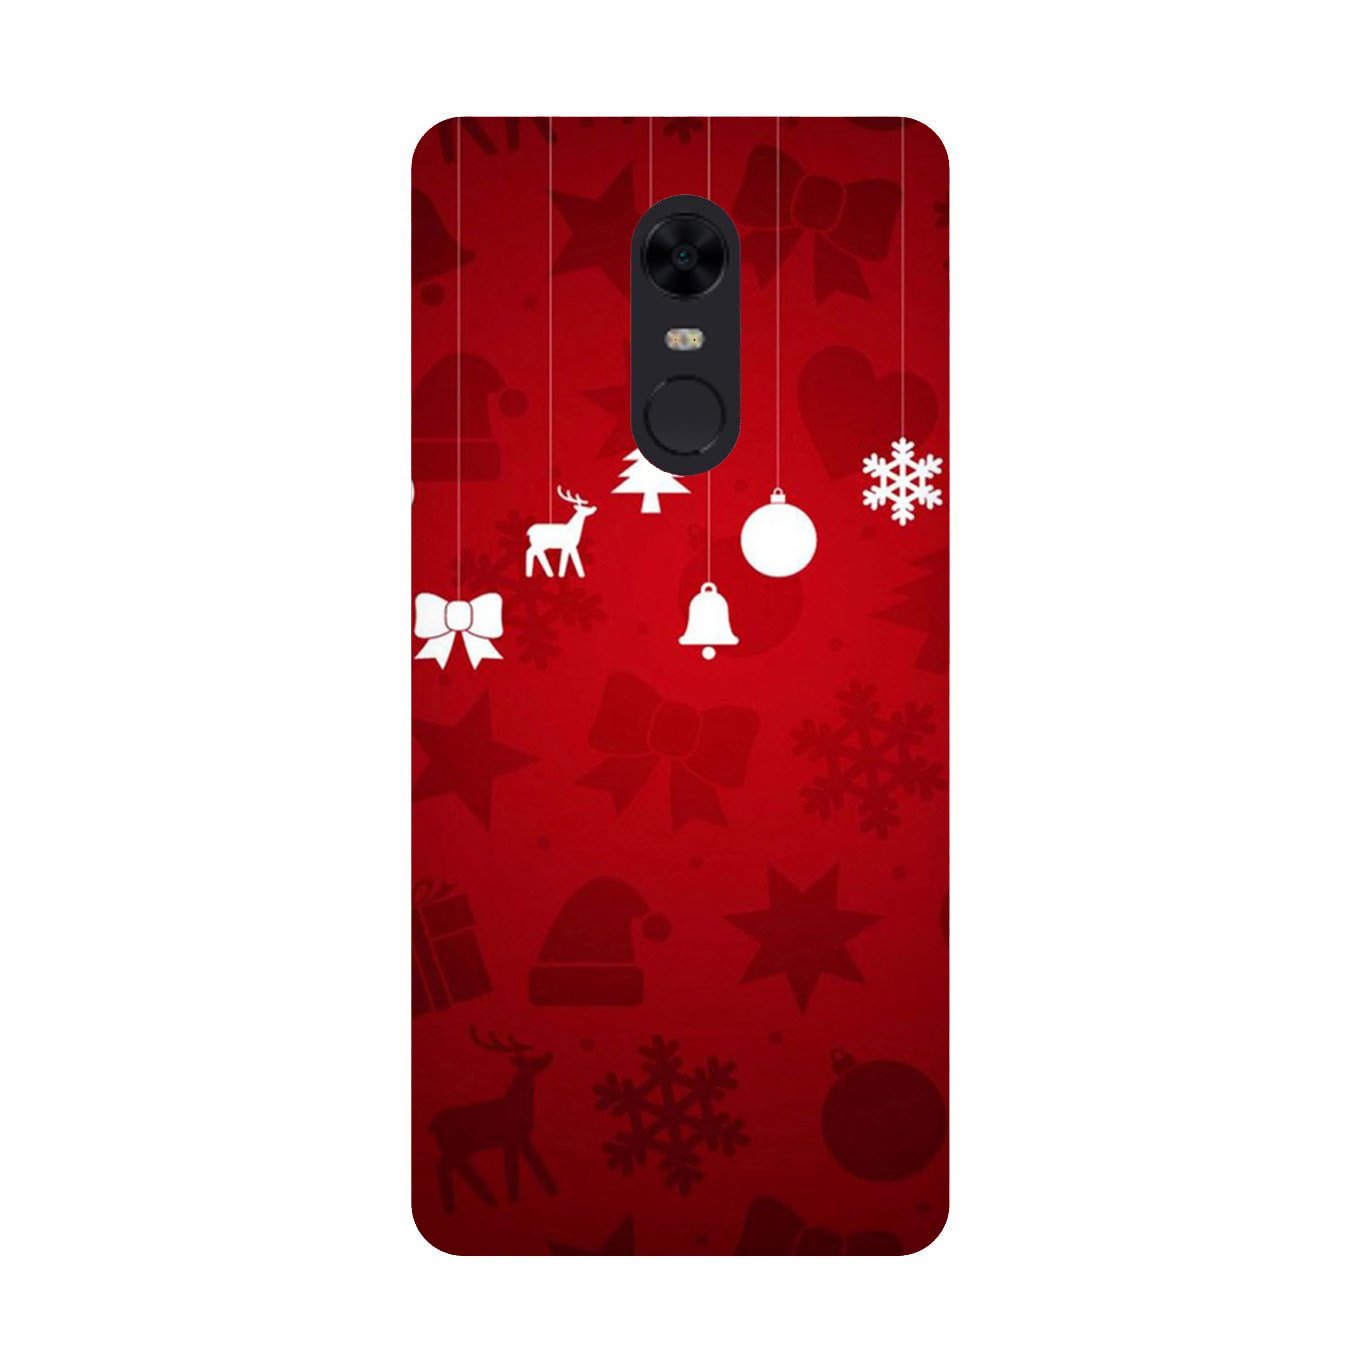 Christmas Case for Redmi Note 4